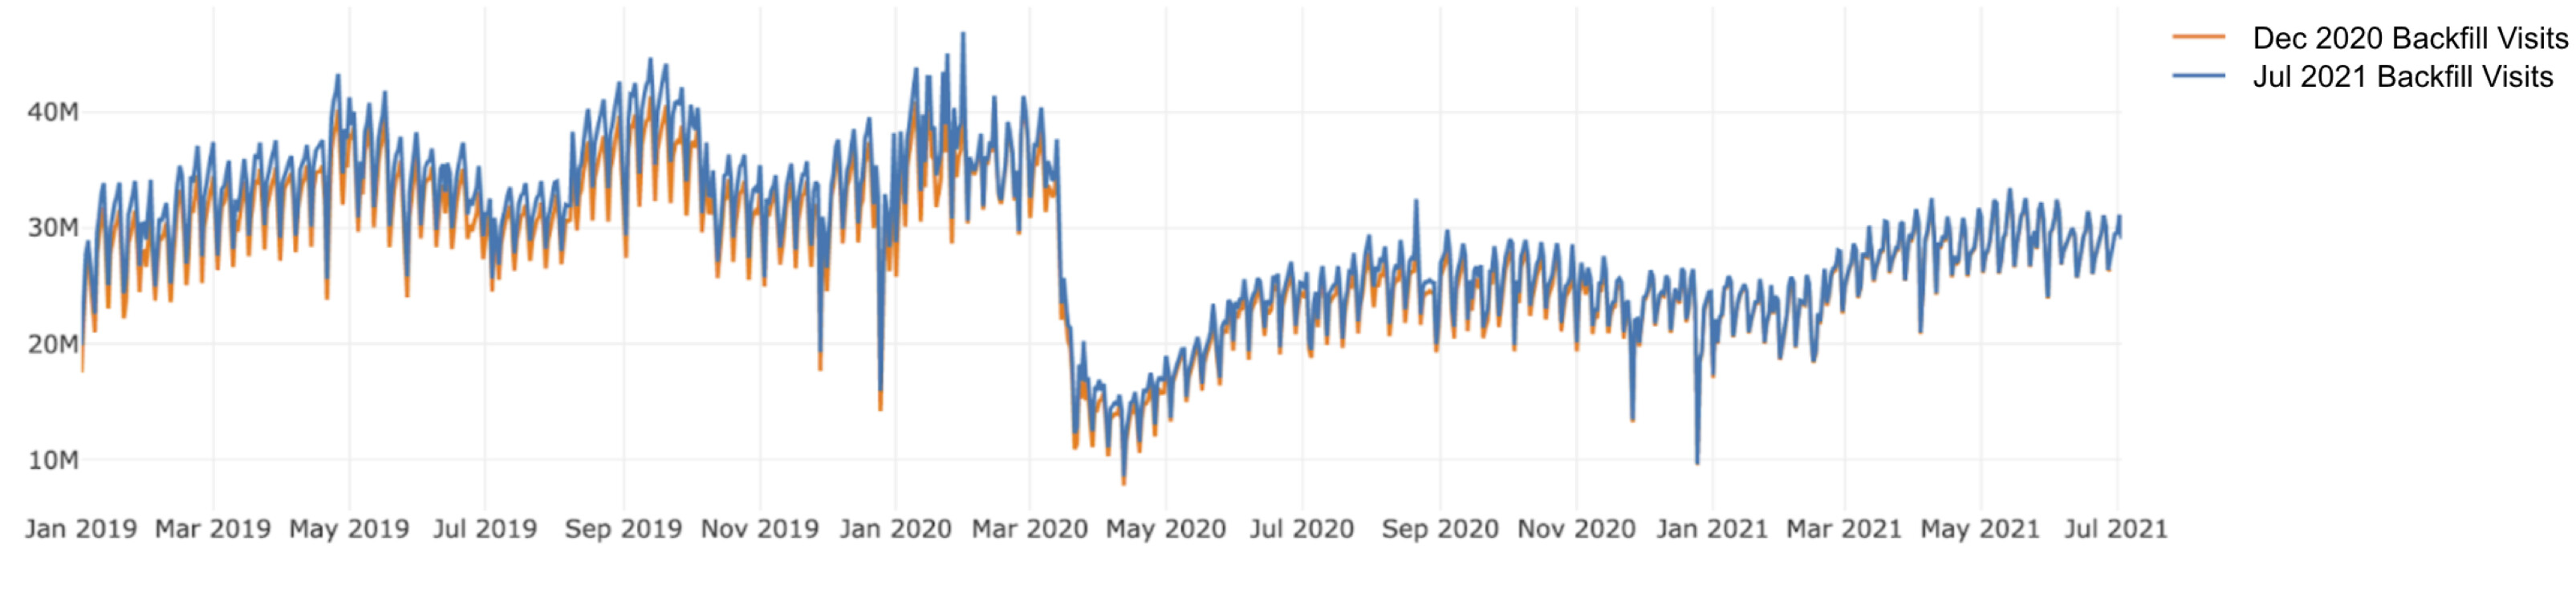 Daily total POI visits from the July 2021 and Dec 2020 backfills show similar trends overall.